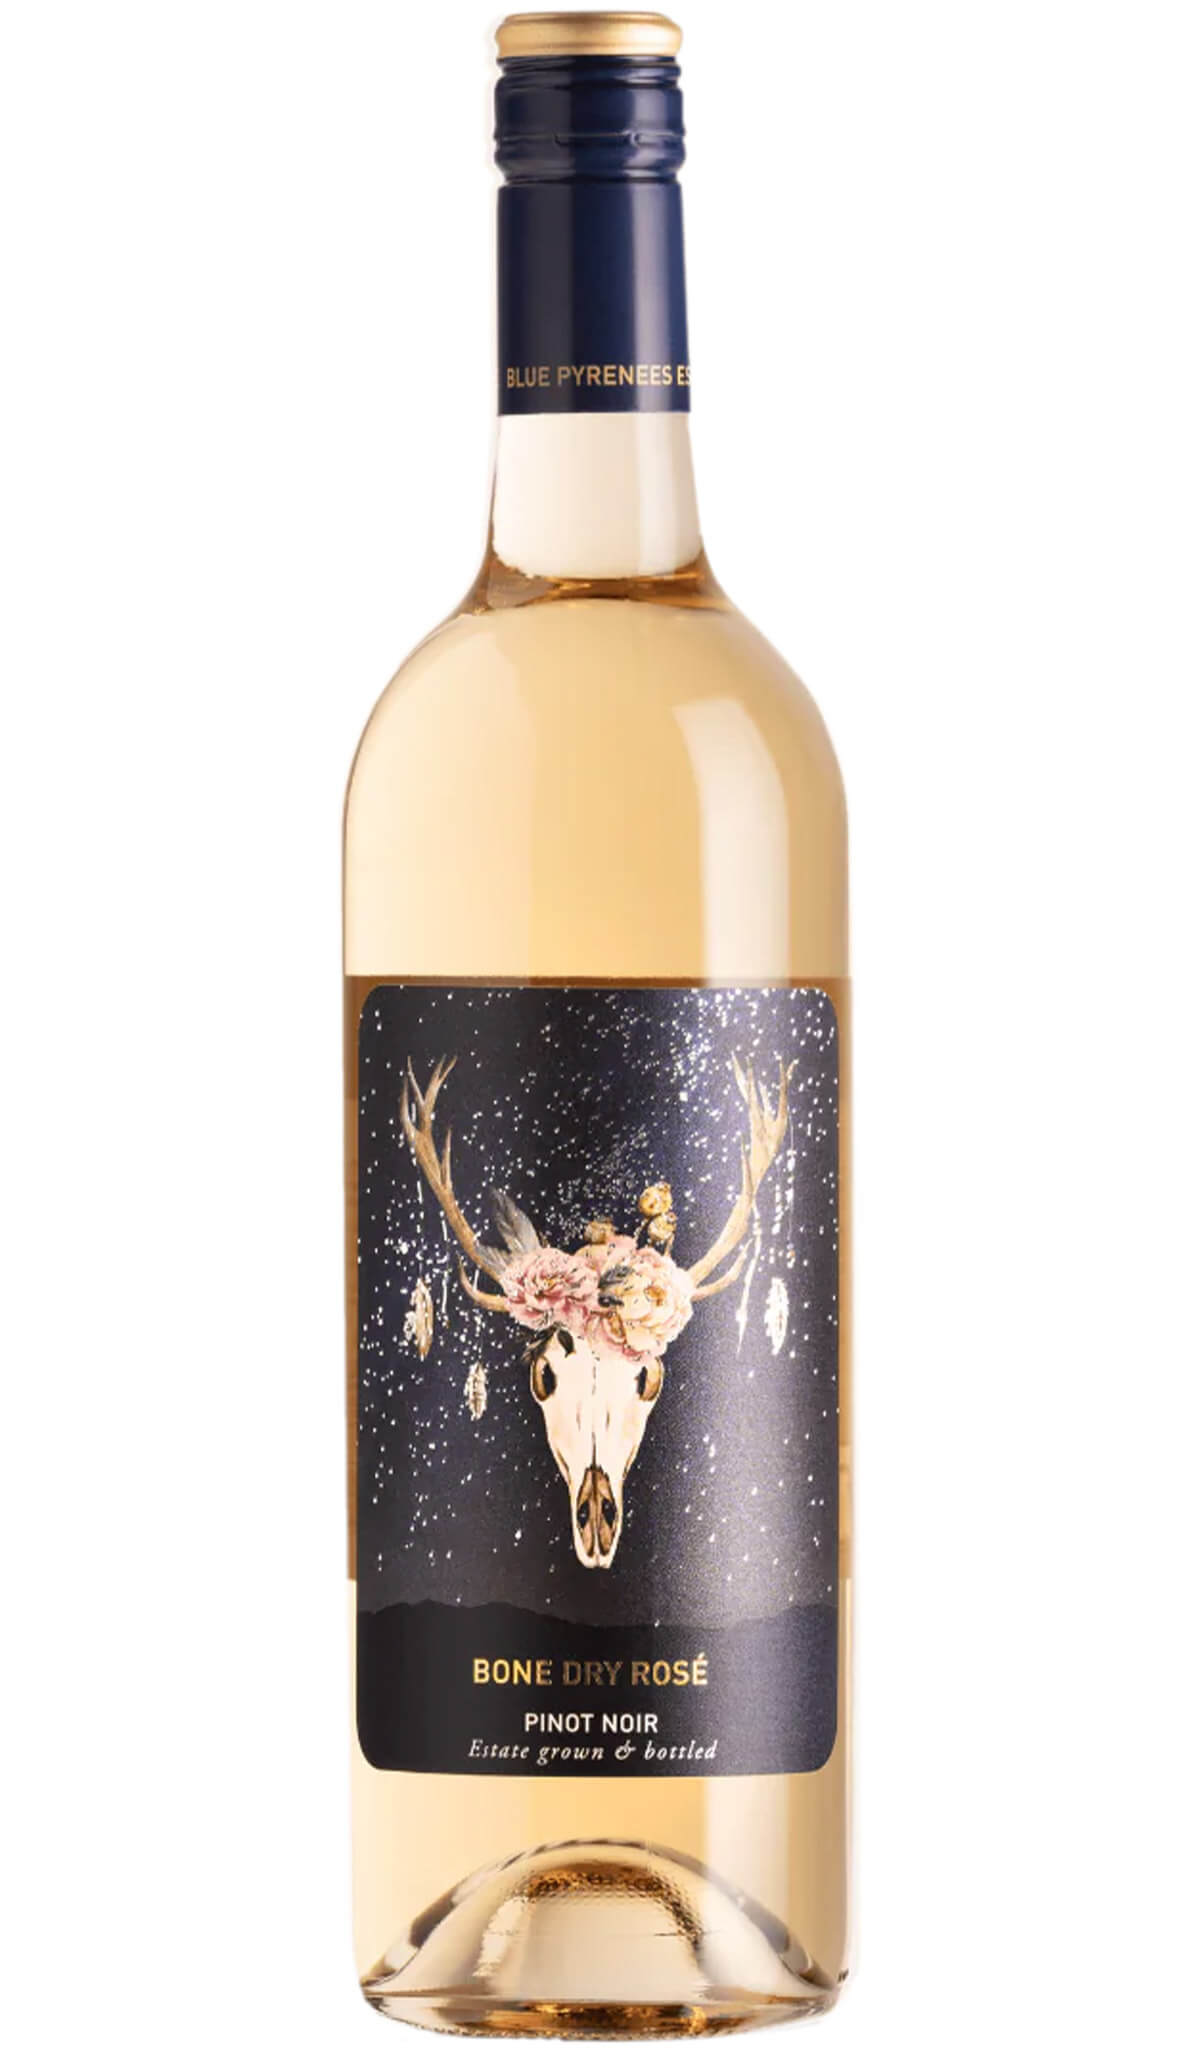 Find out more or buy Blue Pyrenees Bone Dry Rosé 2021 online at Wine Sellers Direct - Australia’s independent liquor specialists.